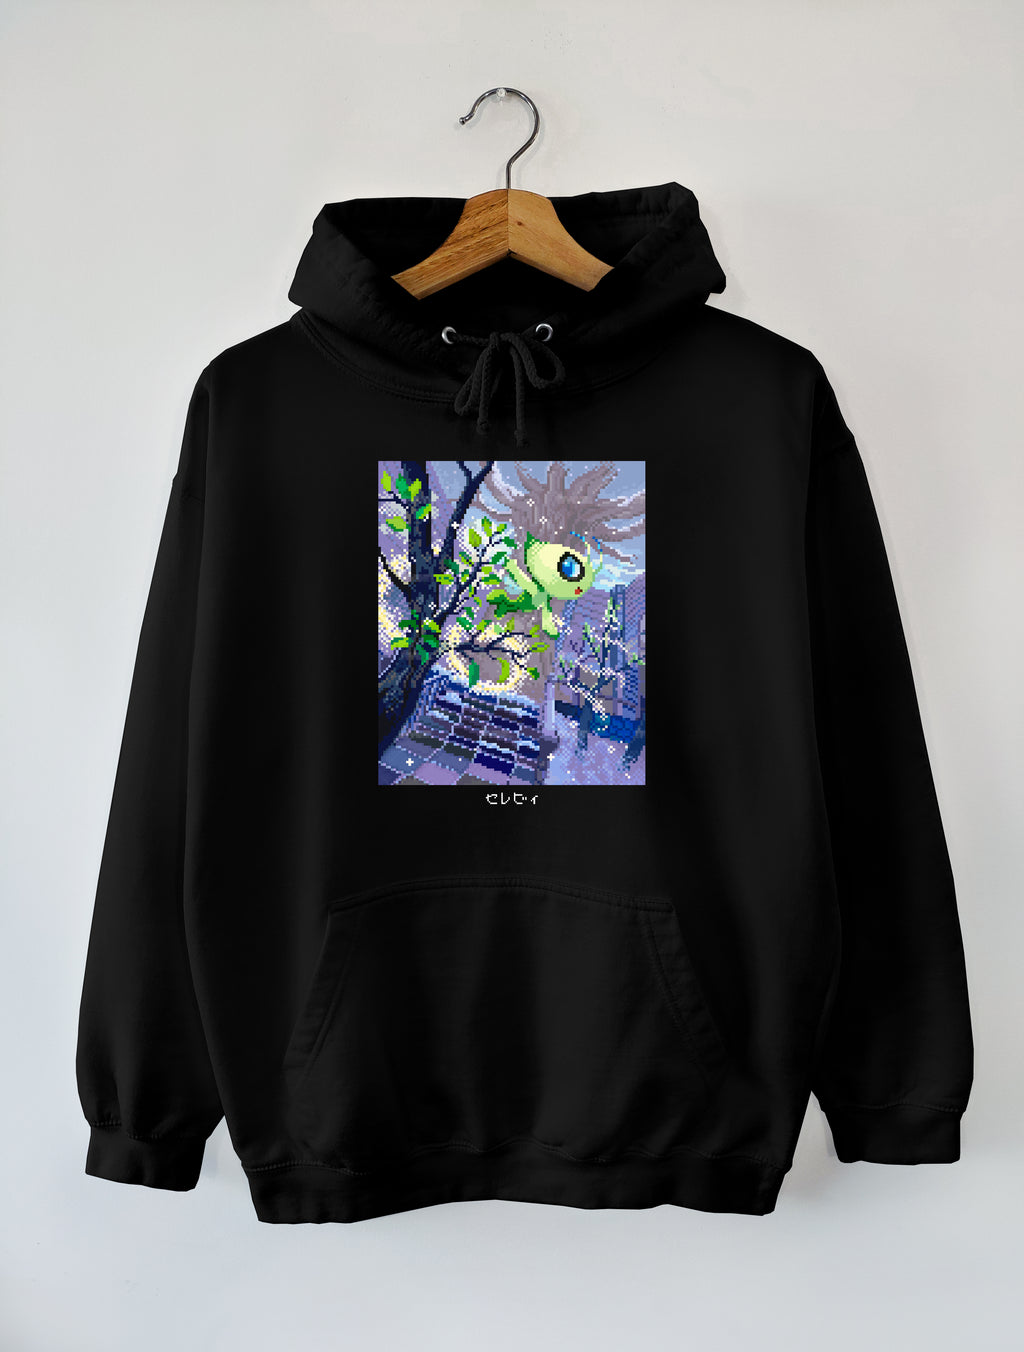 UNISEX HOODIE / PKM FULL ART - VOICE OF THE FOREST